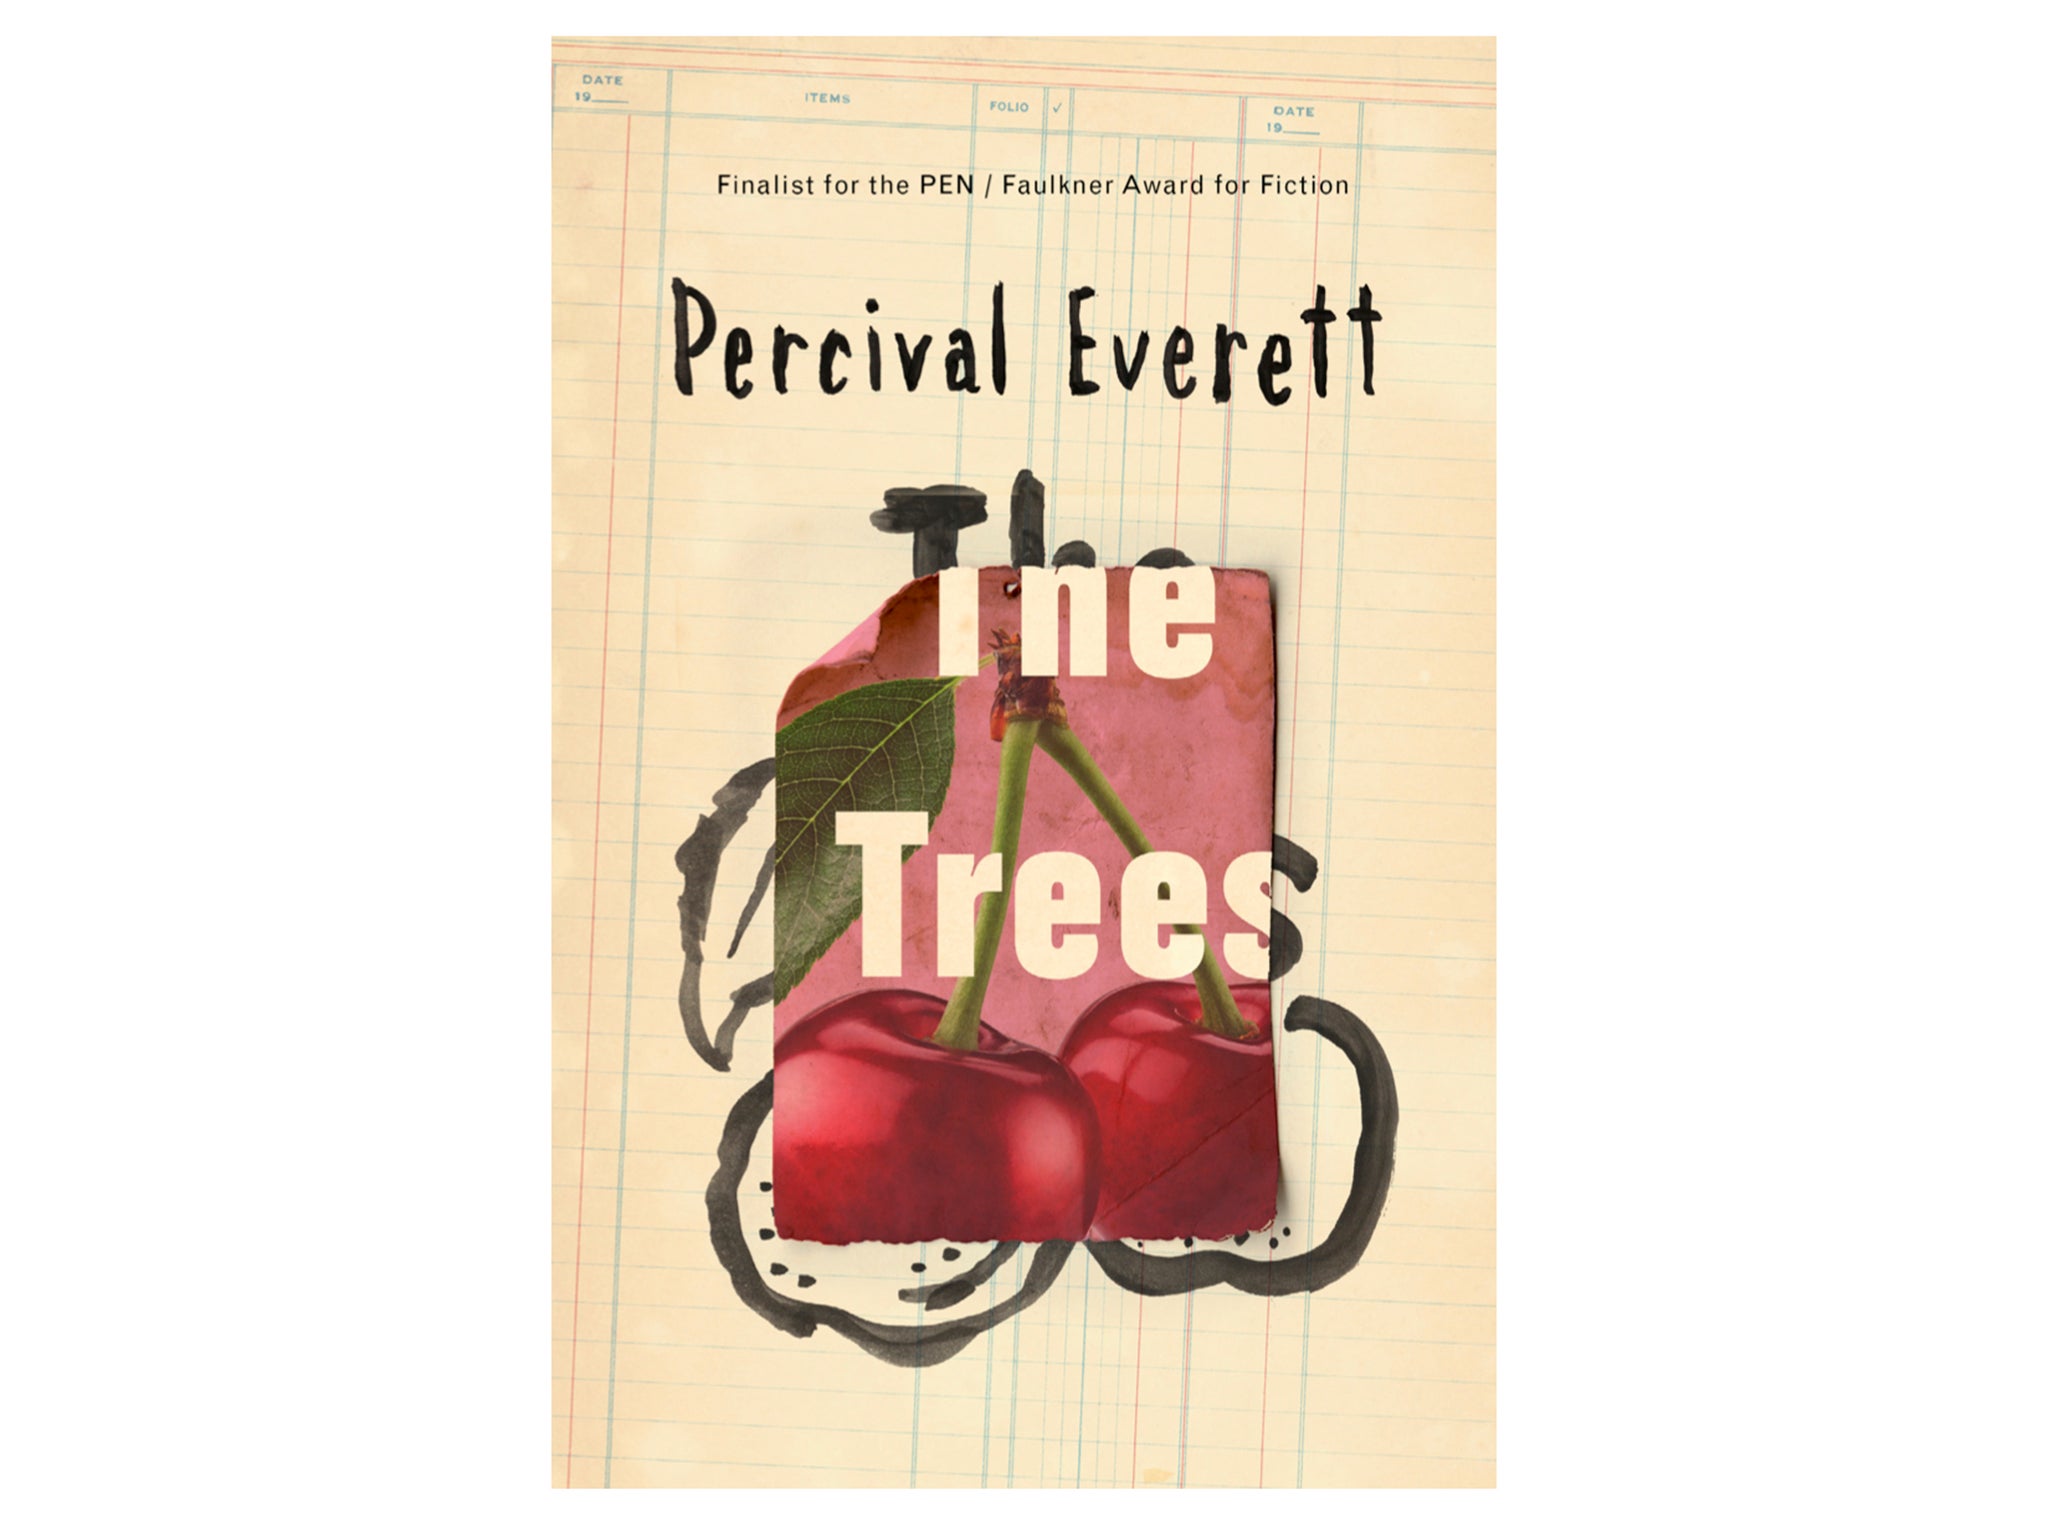 Indybest-booker-prize-2022-The Trees, Percival Everett.jpg